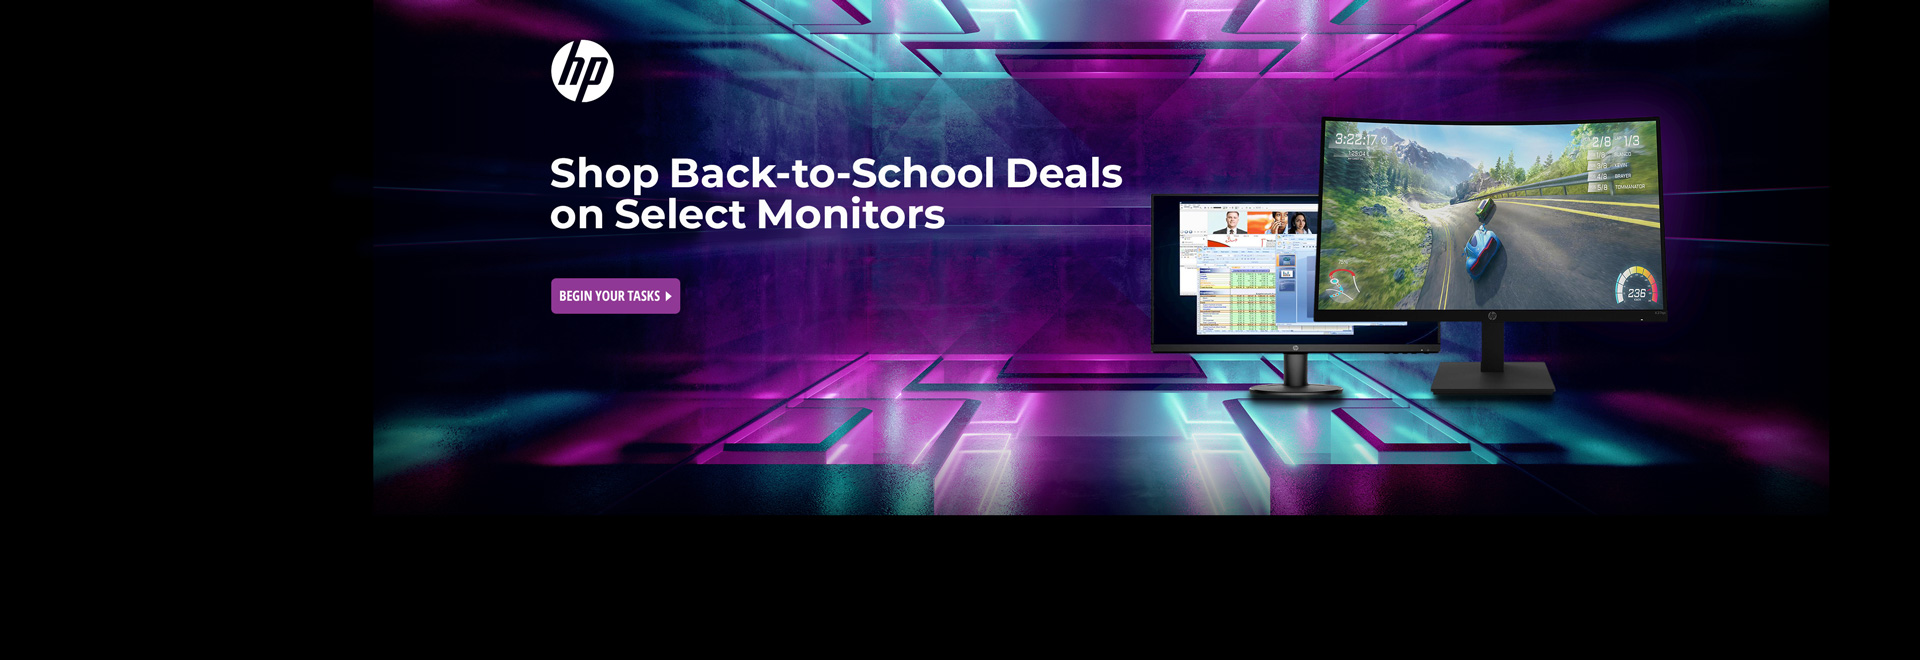 Back-to-school deals on select monitors